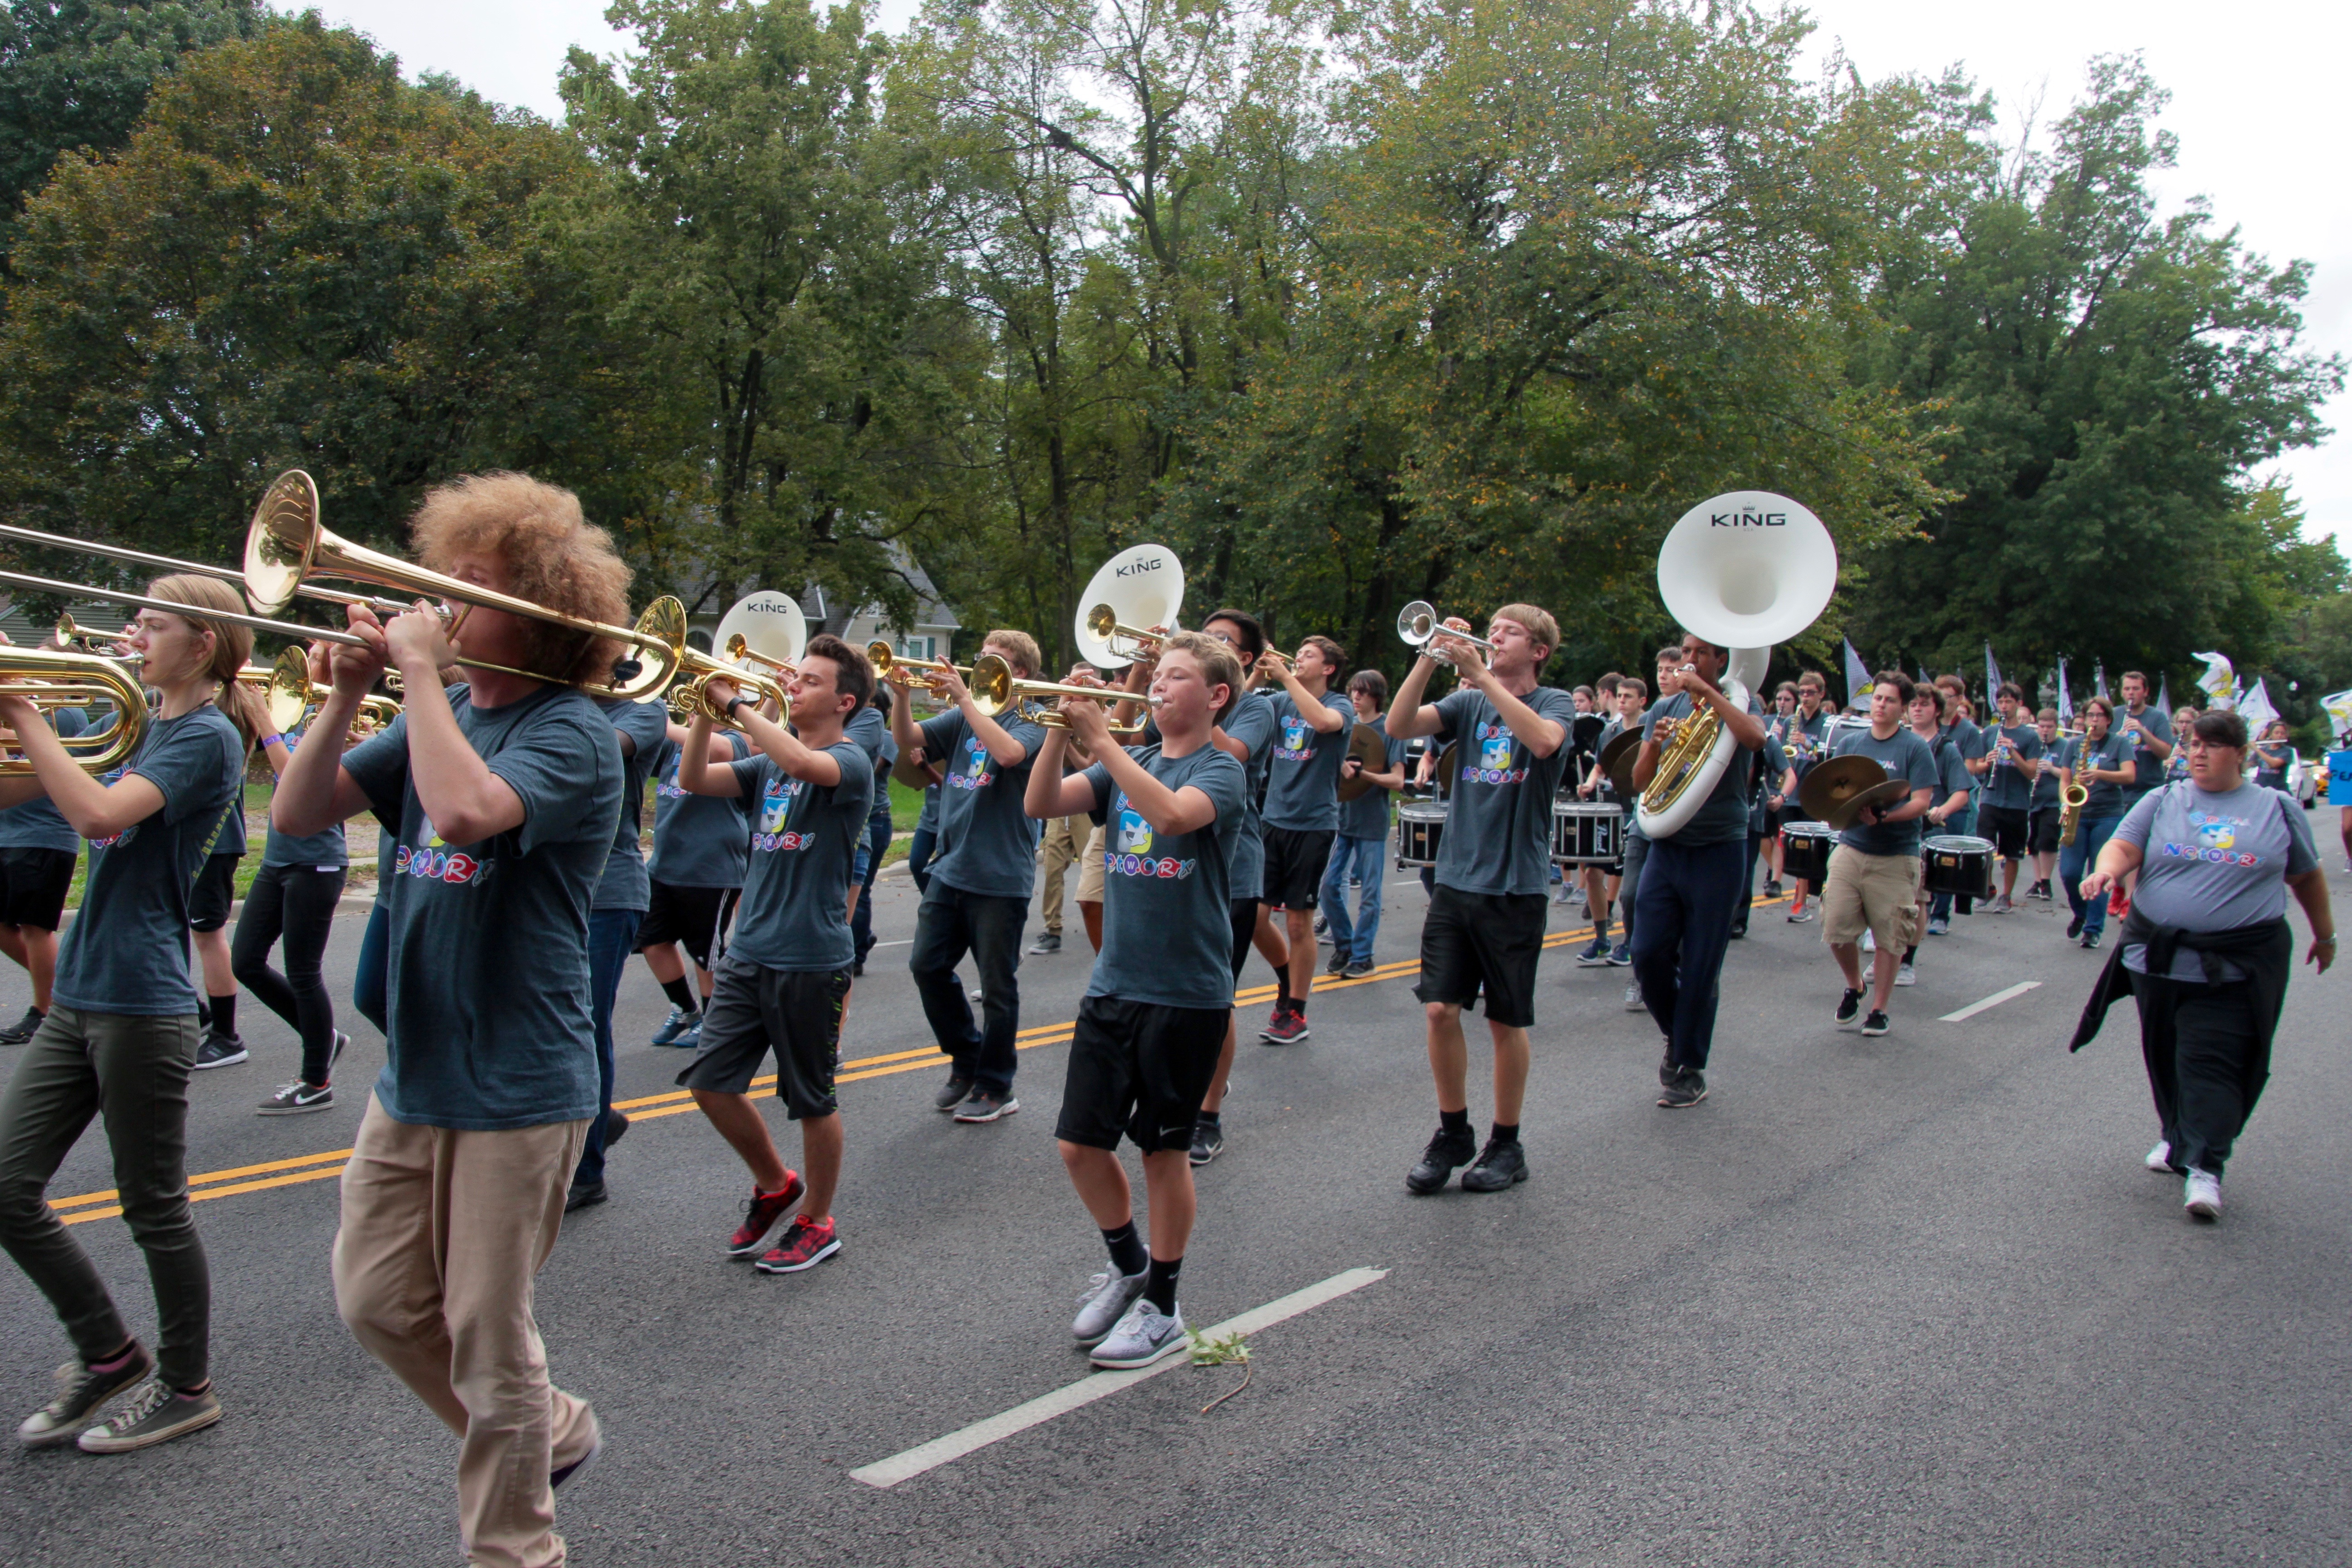 Shawnee Mission West Homecoming Parade